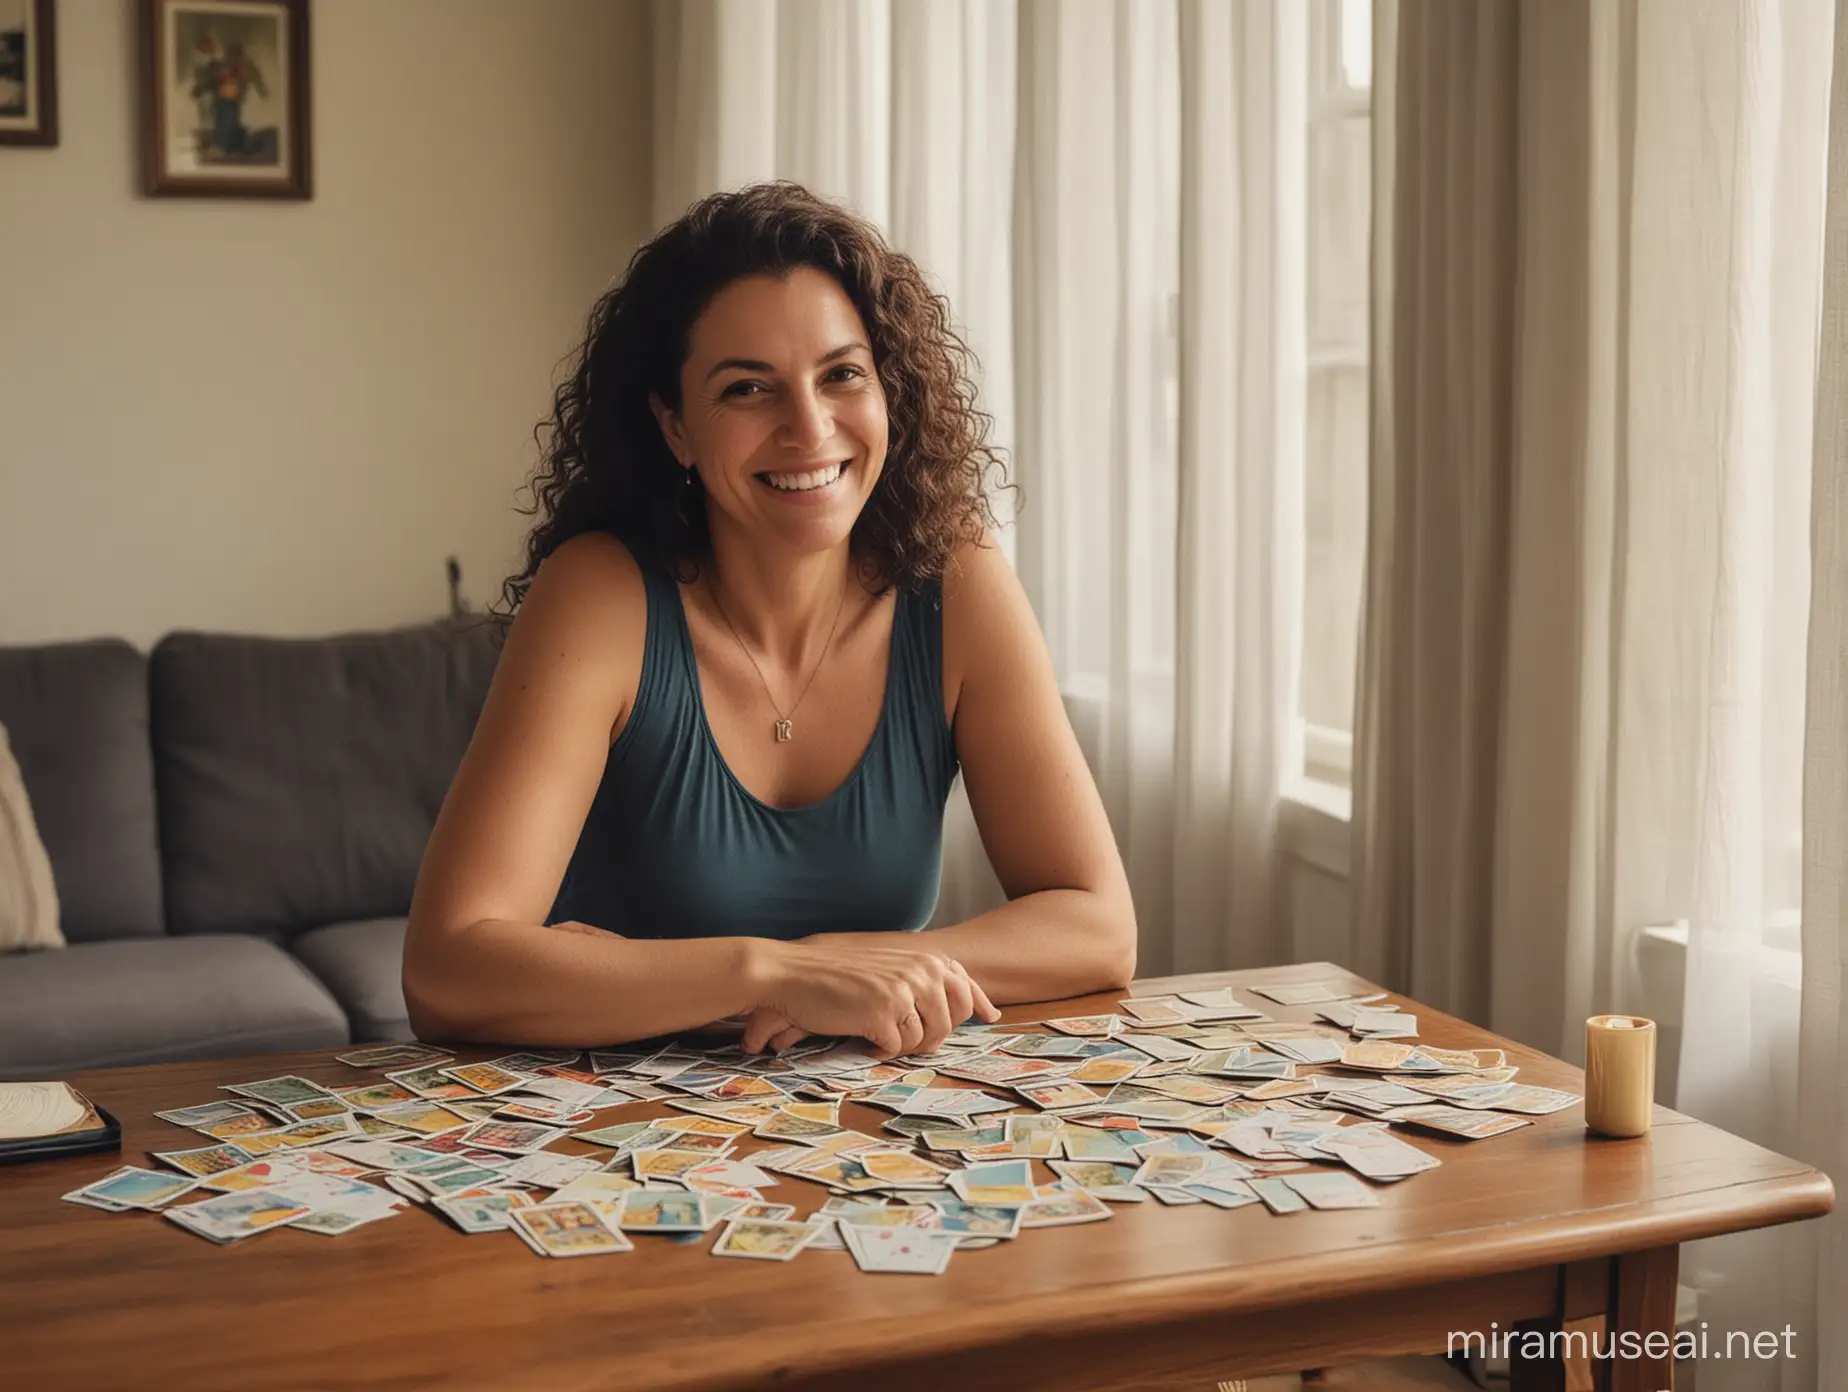 Brazilian Woman Smiling and Reading Tarot Cards in Bright Living Room